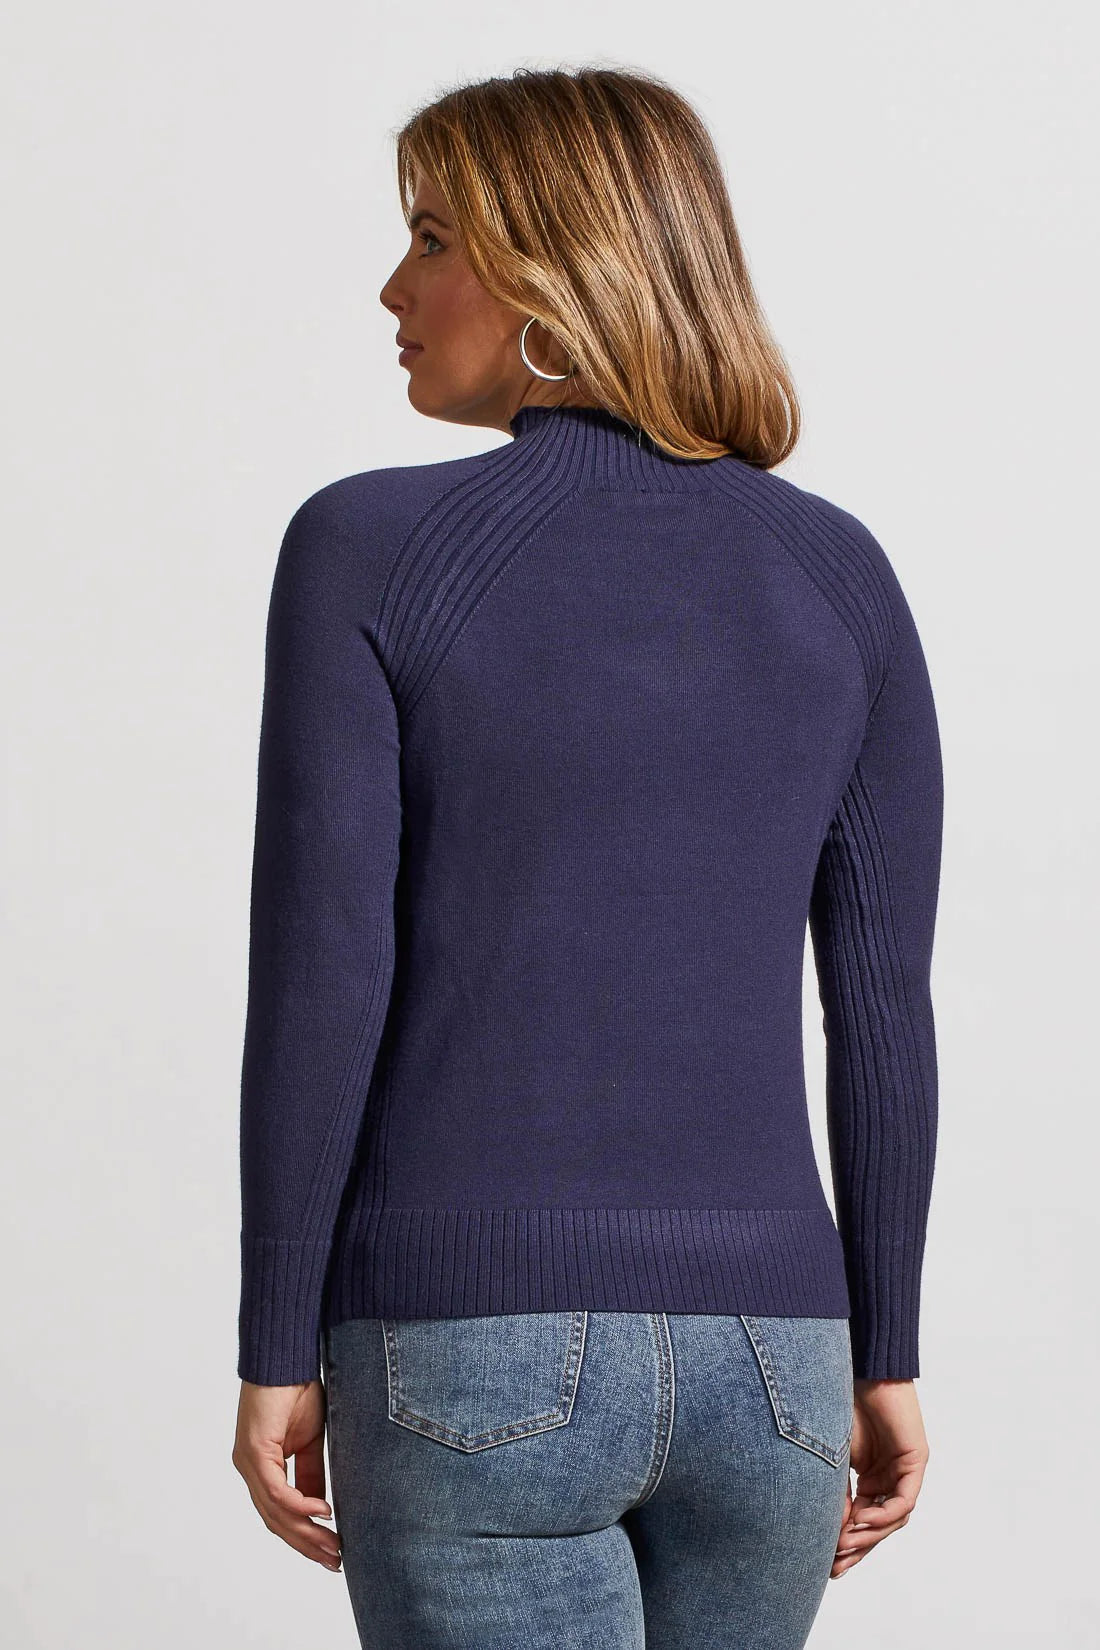 Refined, comfy, and timeless, this funnel neck sweater truly offers everything we'd ever need in a key wardrobe item.